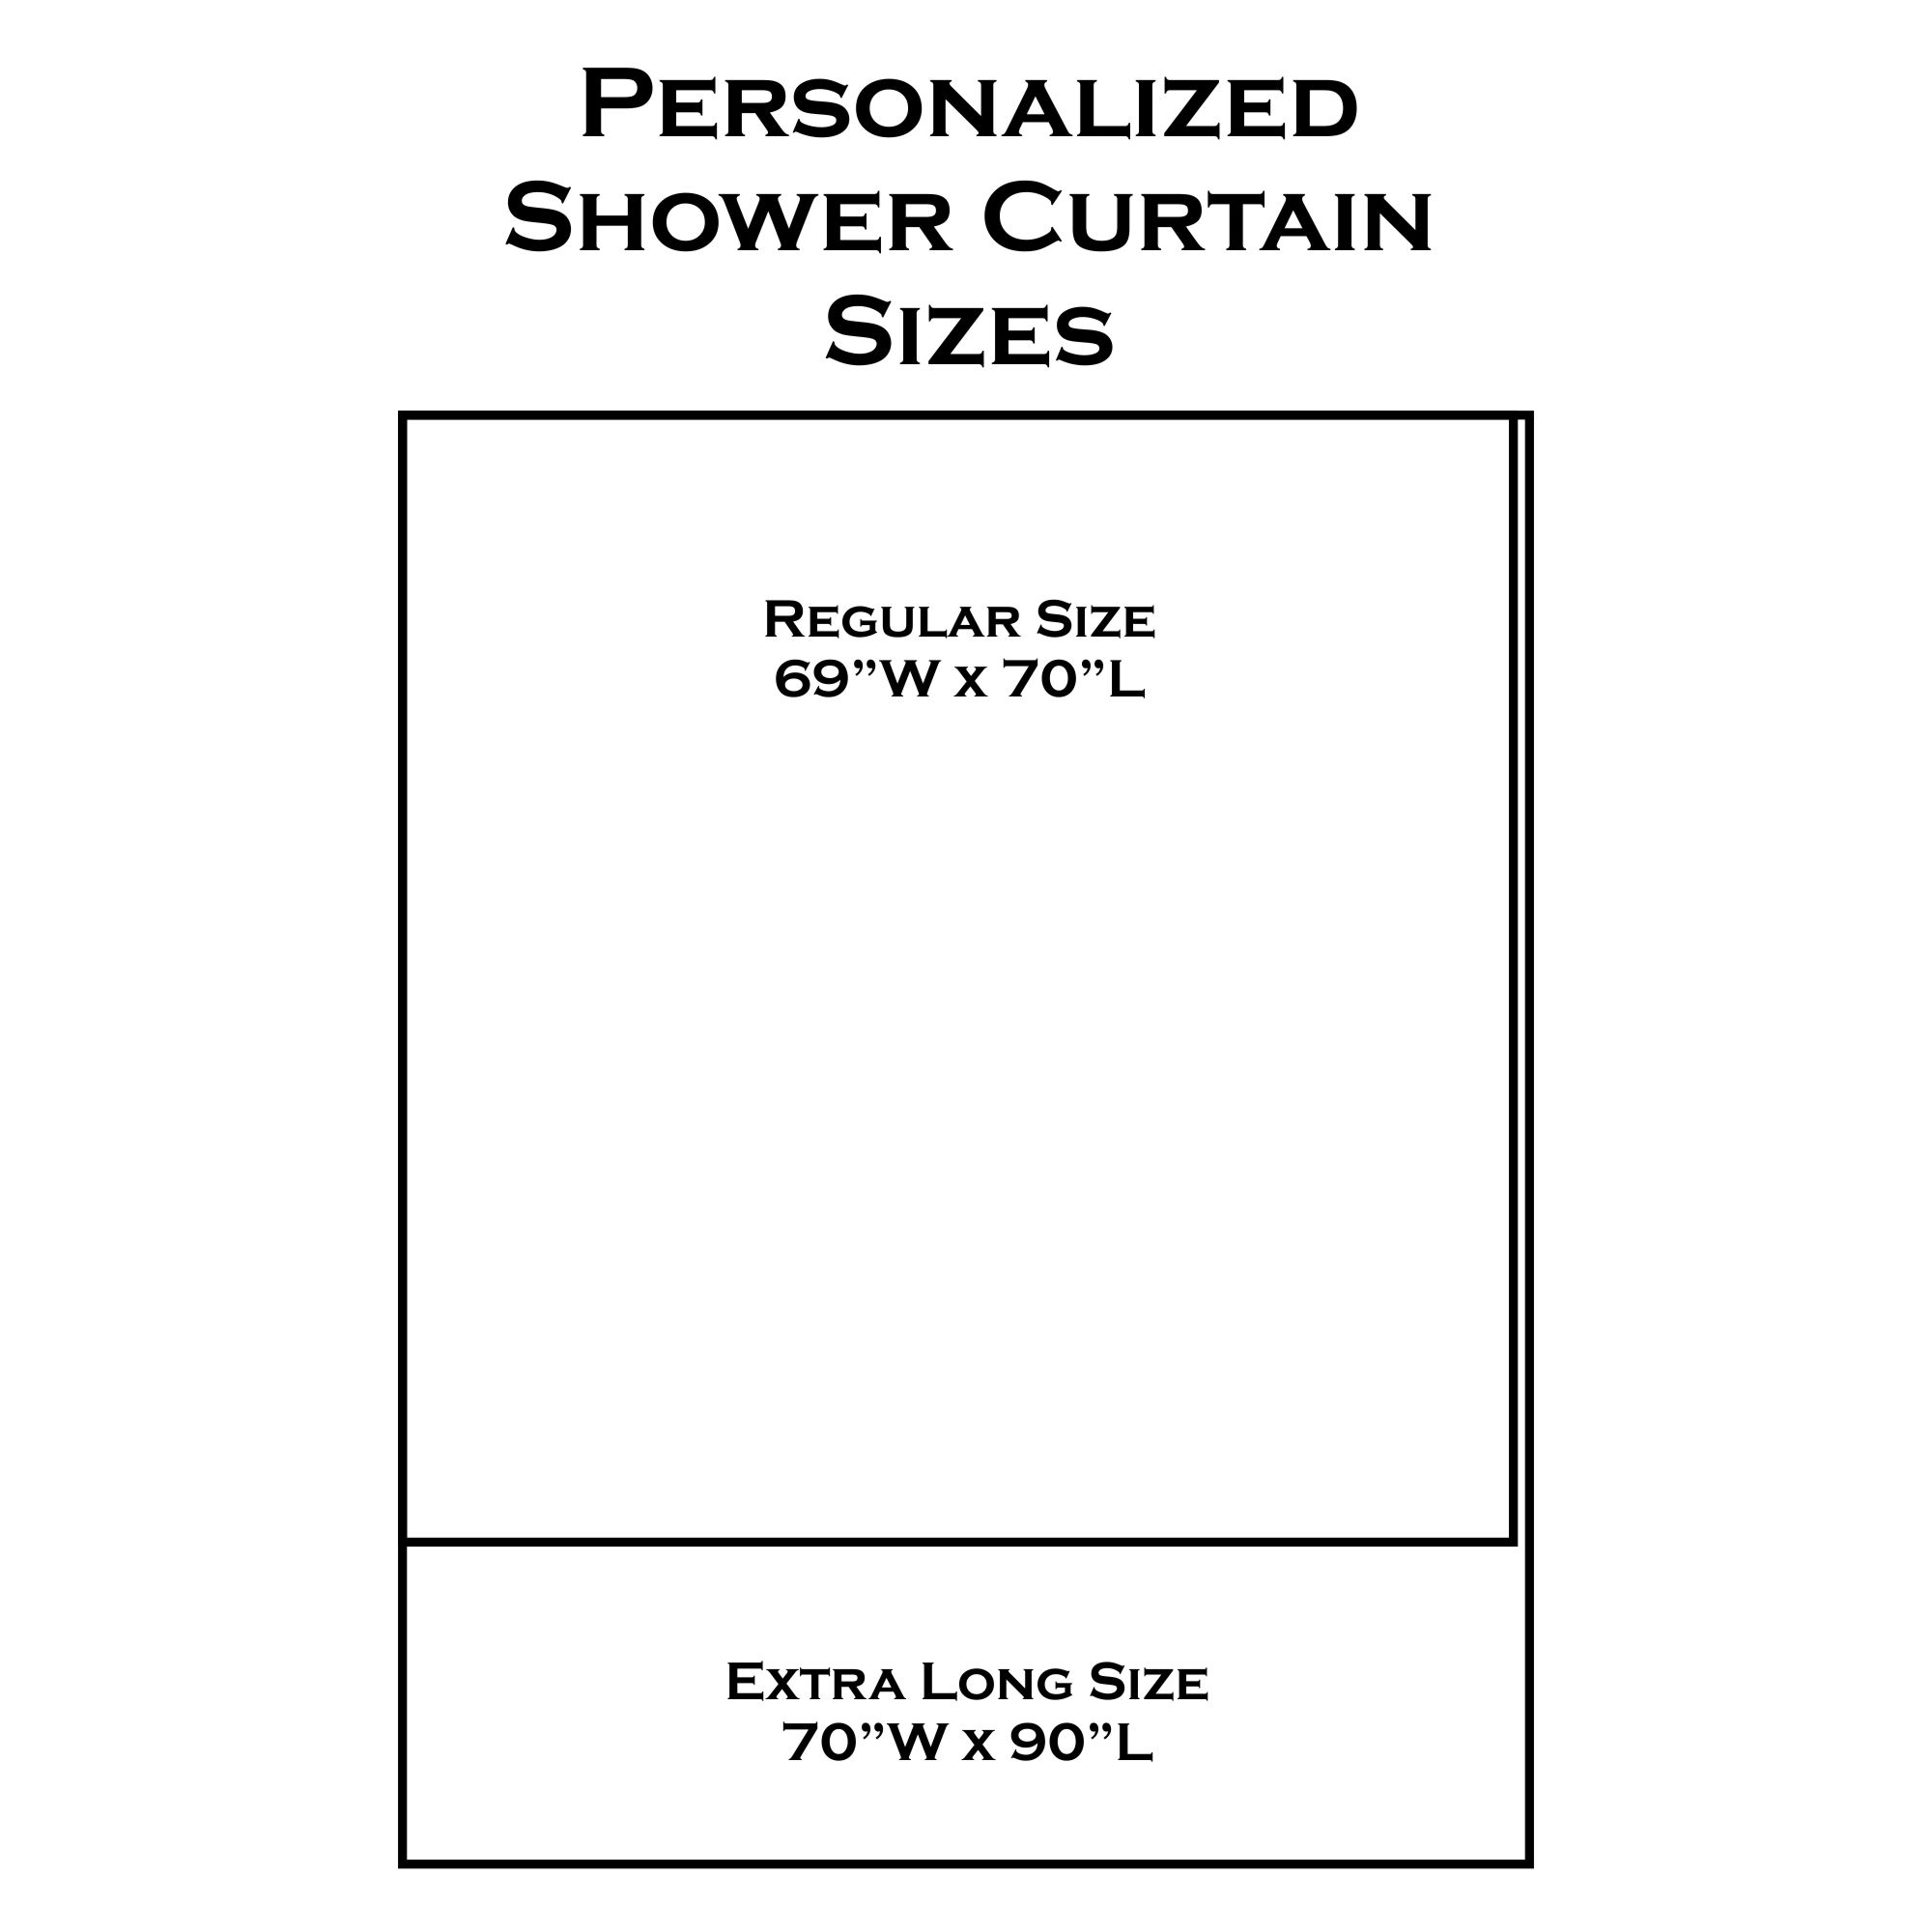 Design Your Own Shower Curtain, What Are Standard Sizes For Shower Curtains